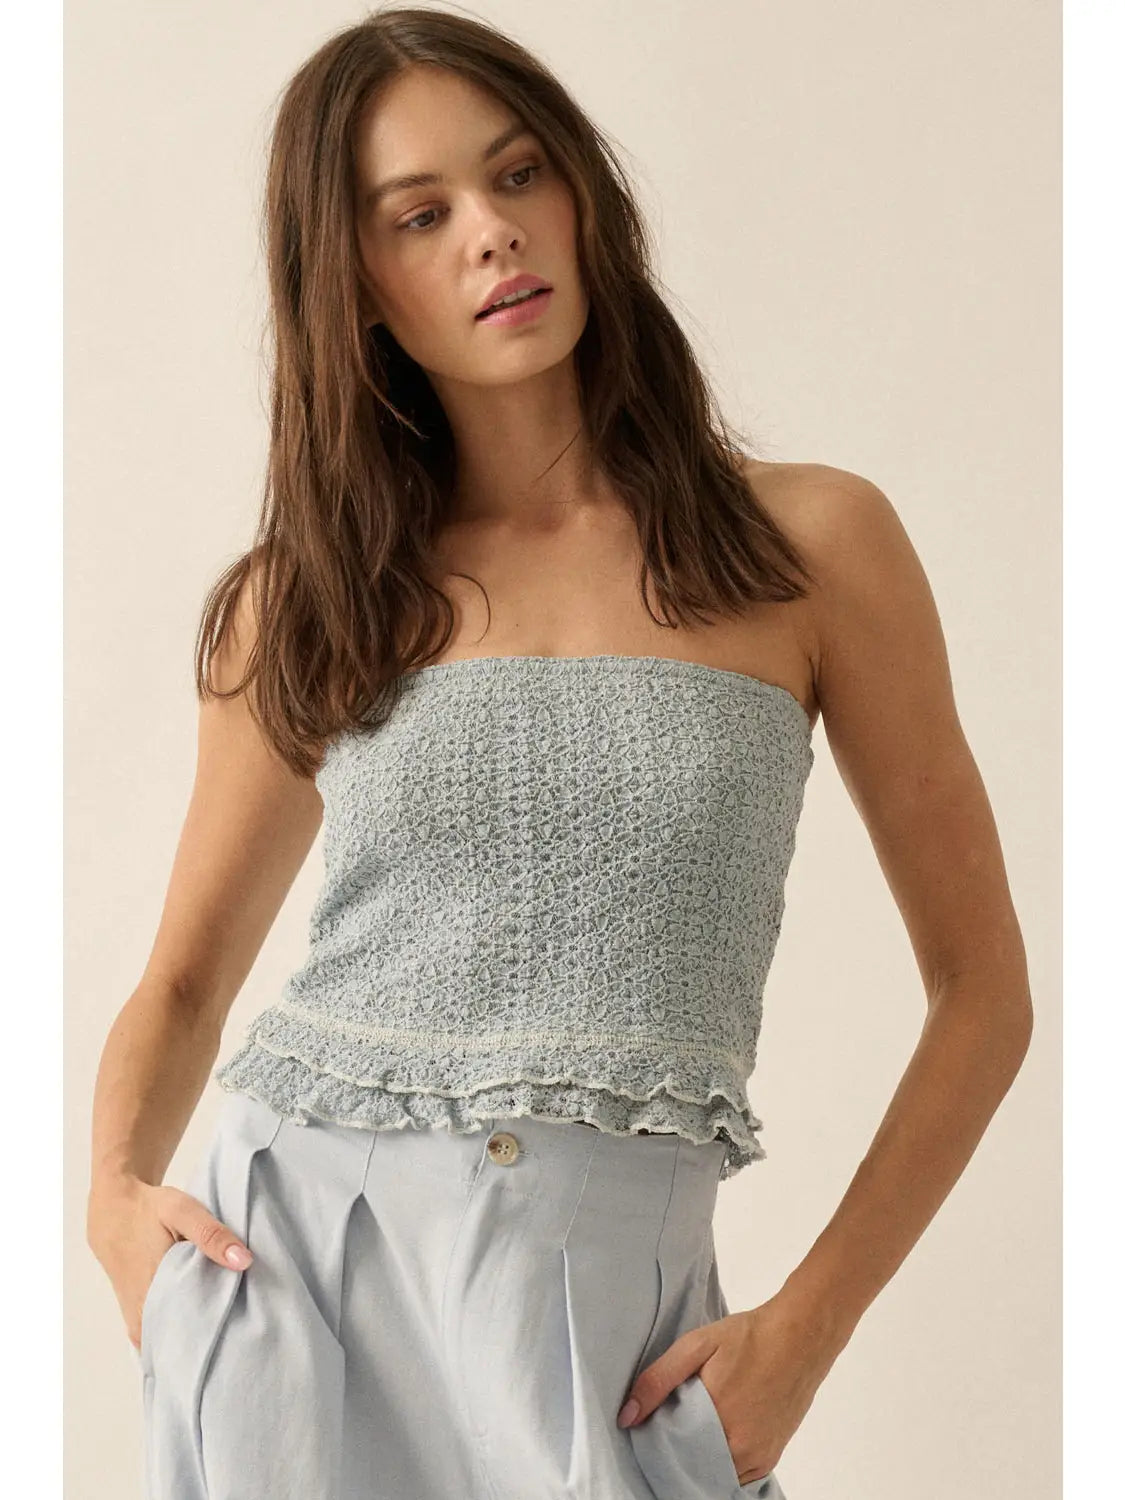 Floral Lace Ruffled Tube Top